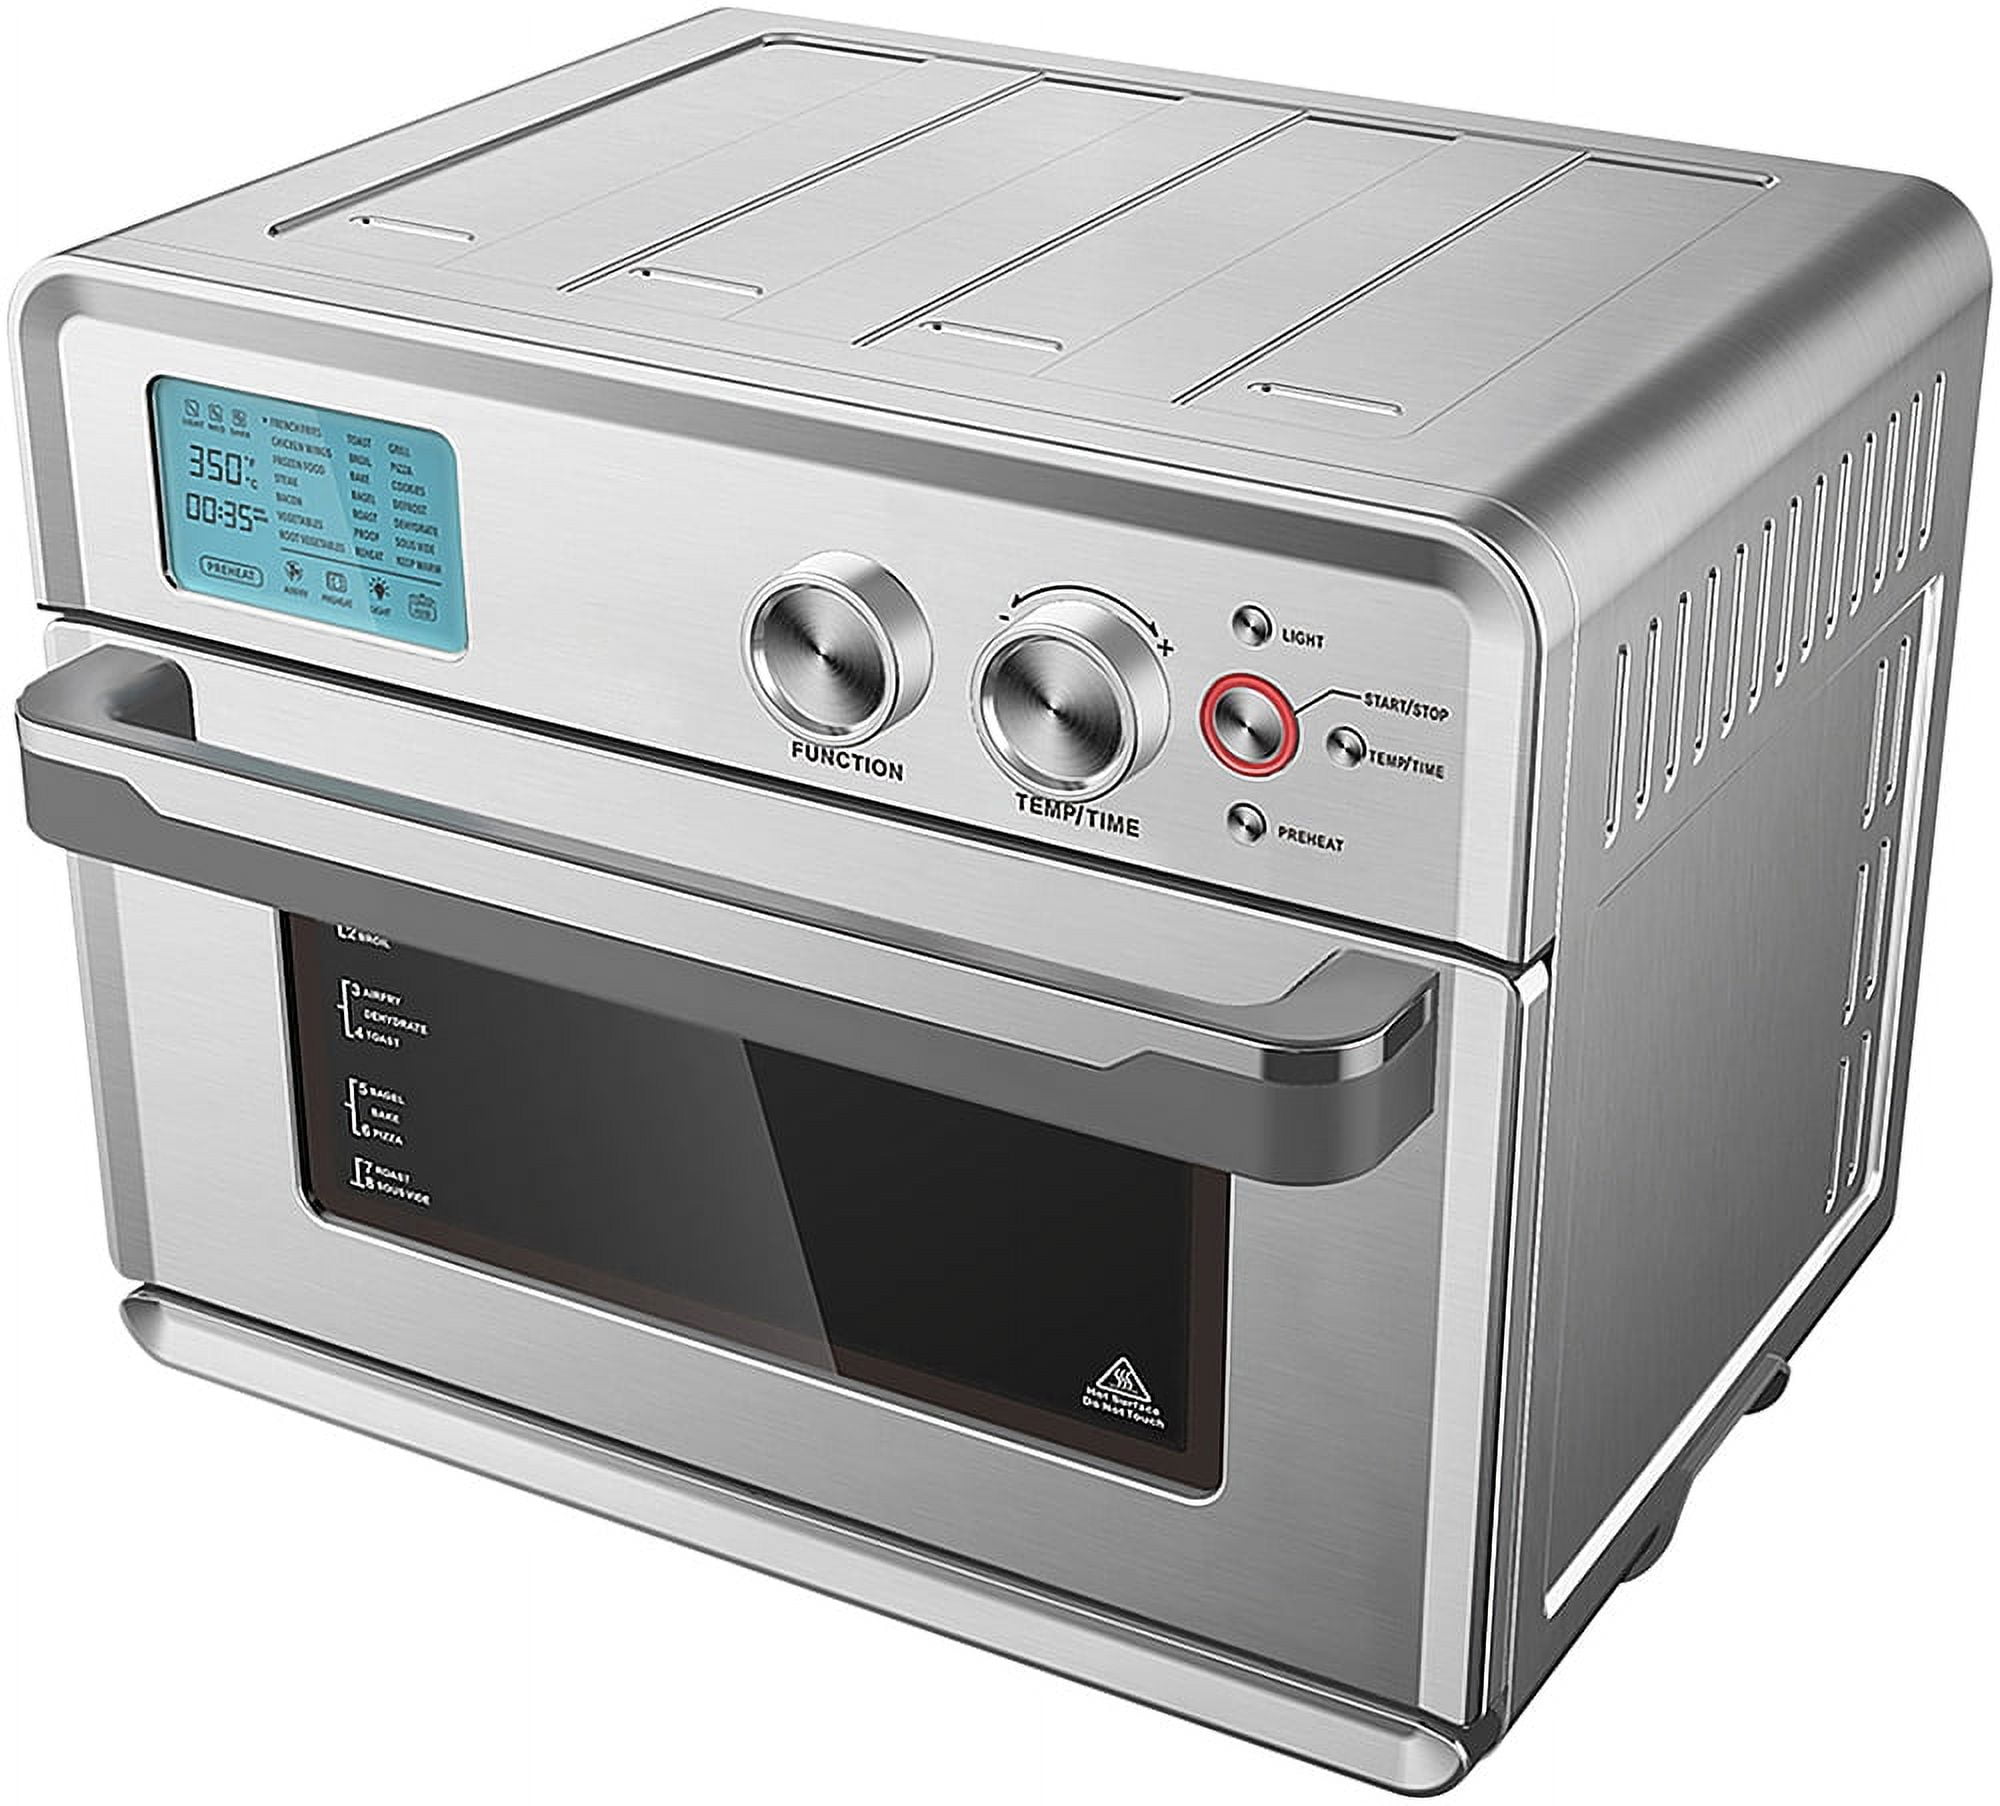  Emeril Everyday 360 Deluxe Air Fryer Oven, 15.1” x 19.3” x  10.4” with Accessory Pack, Silver : Home & Kitchen